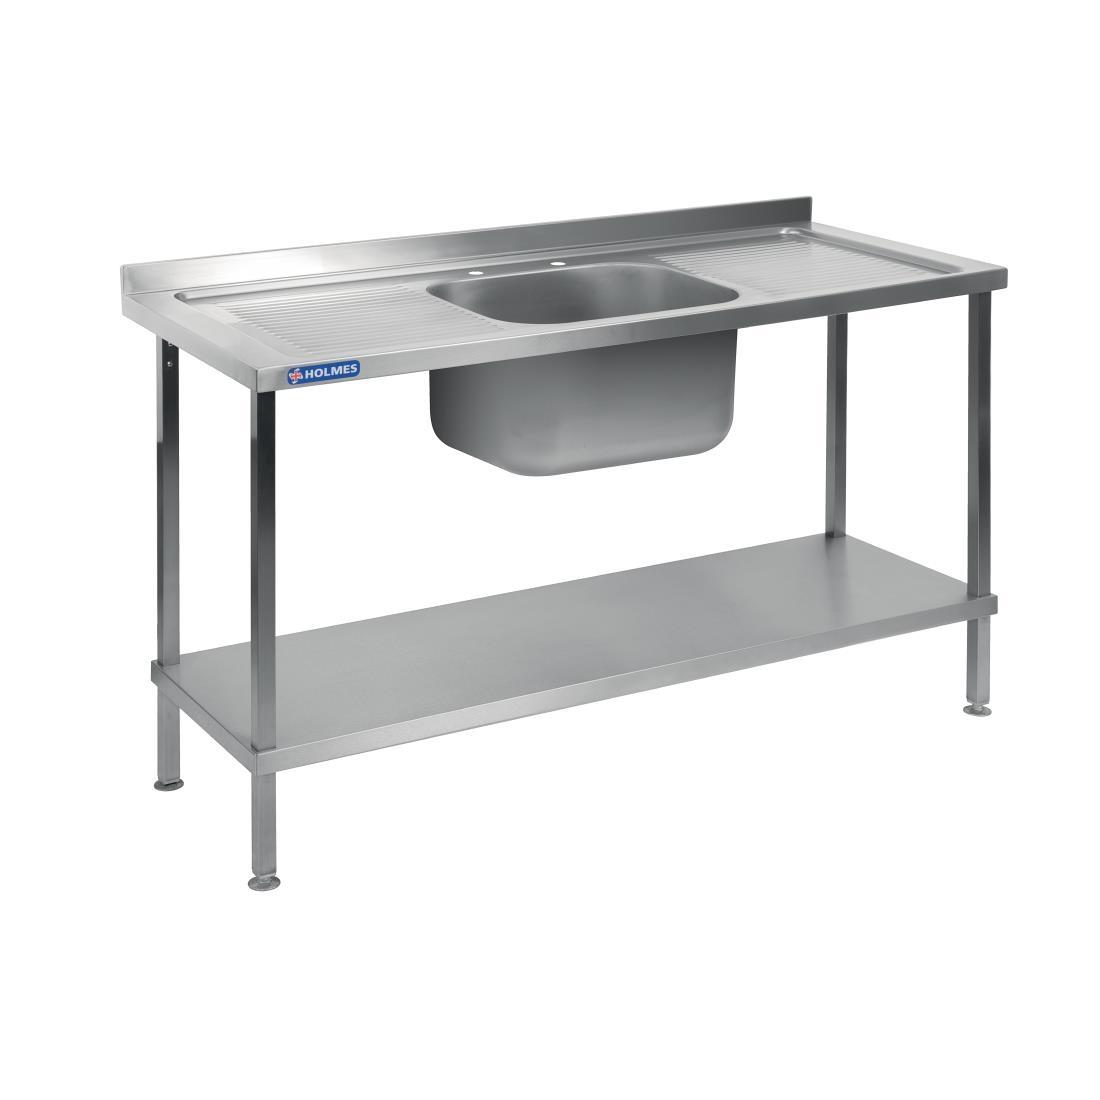 Holmes Stainless Steel Sink Double Drainer 1800mm - DR397  - 1